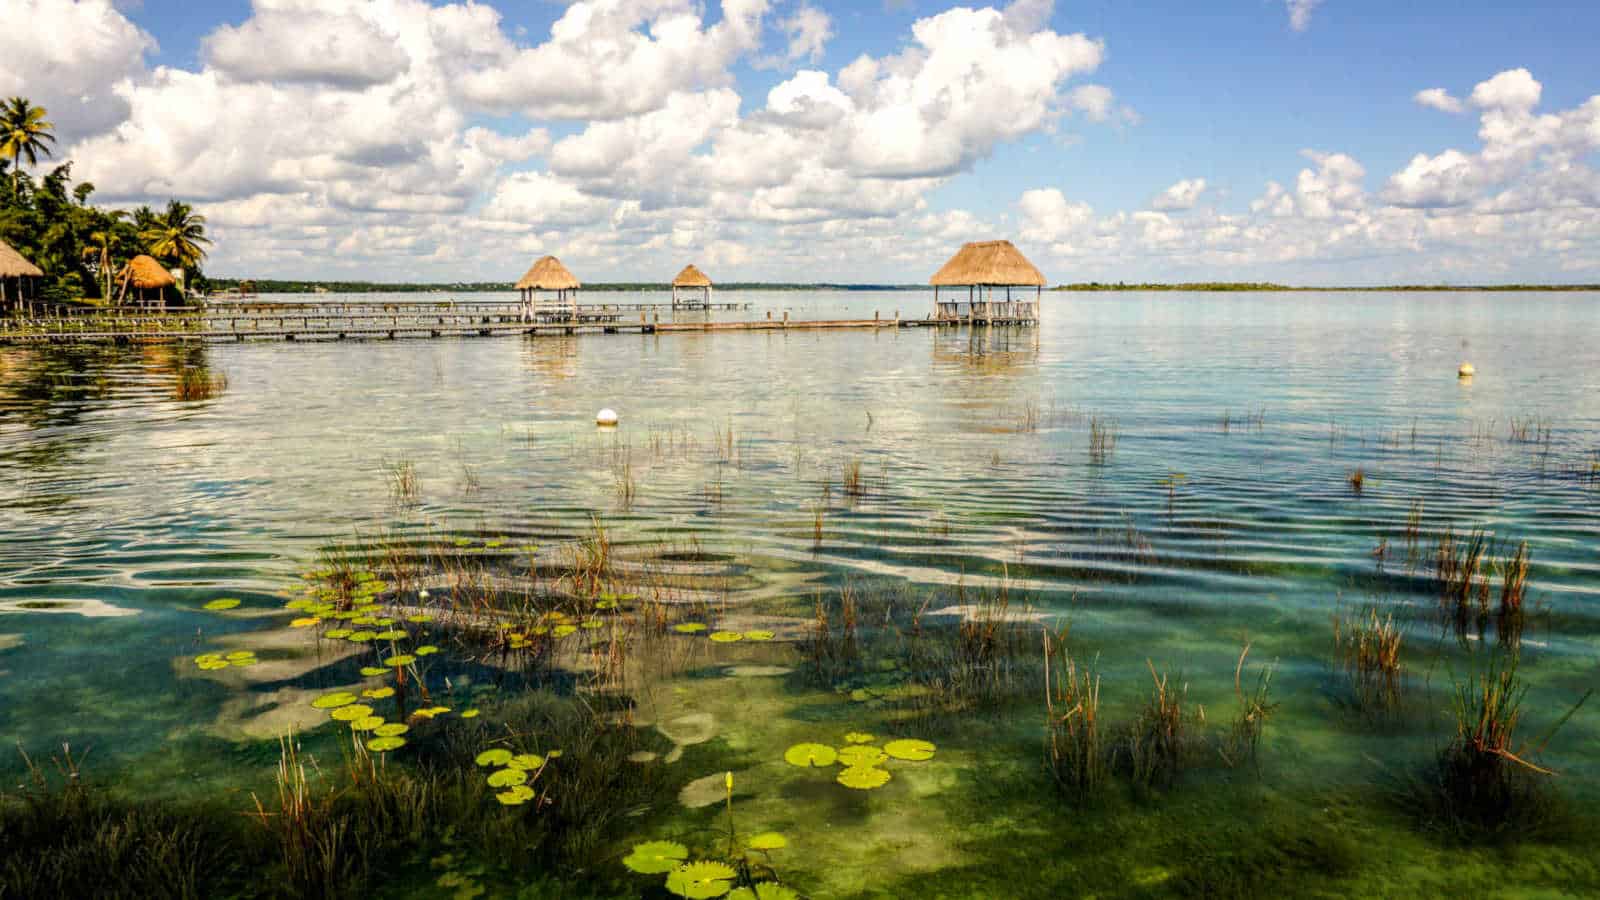 Swimming in the lagoon of Bacalar